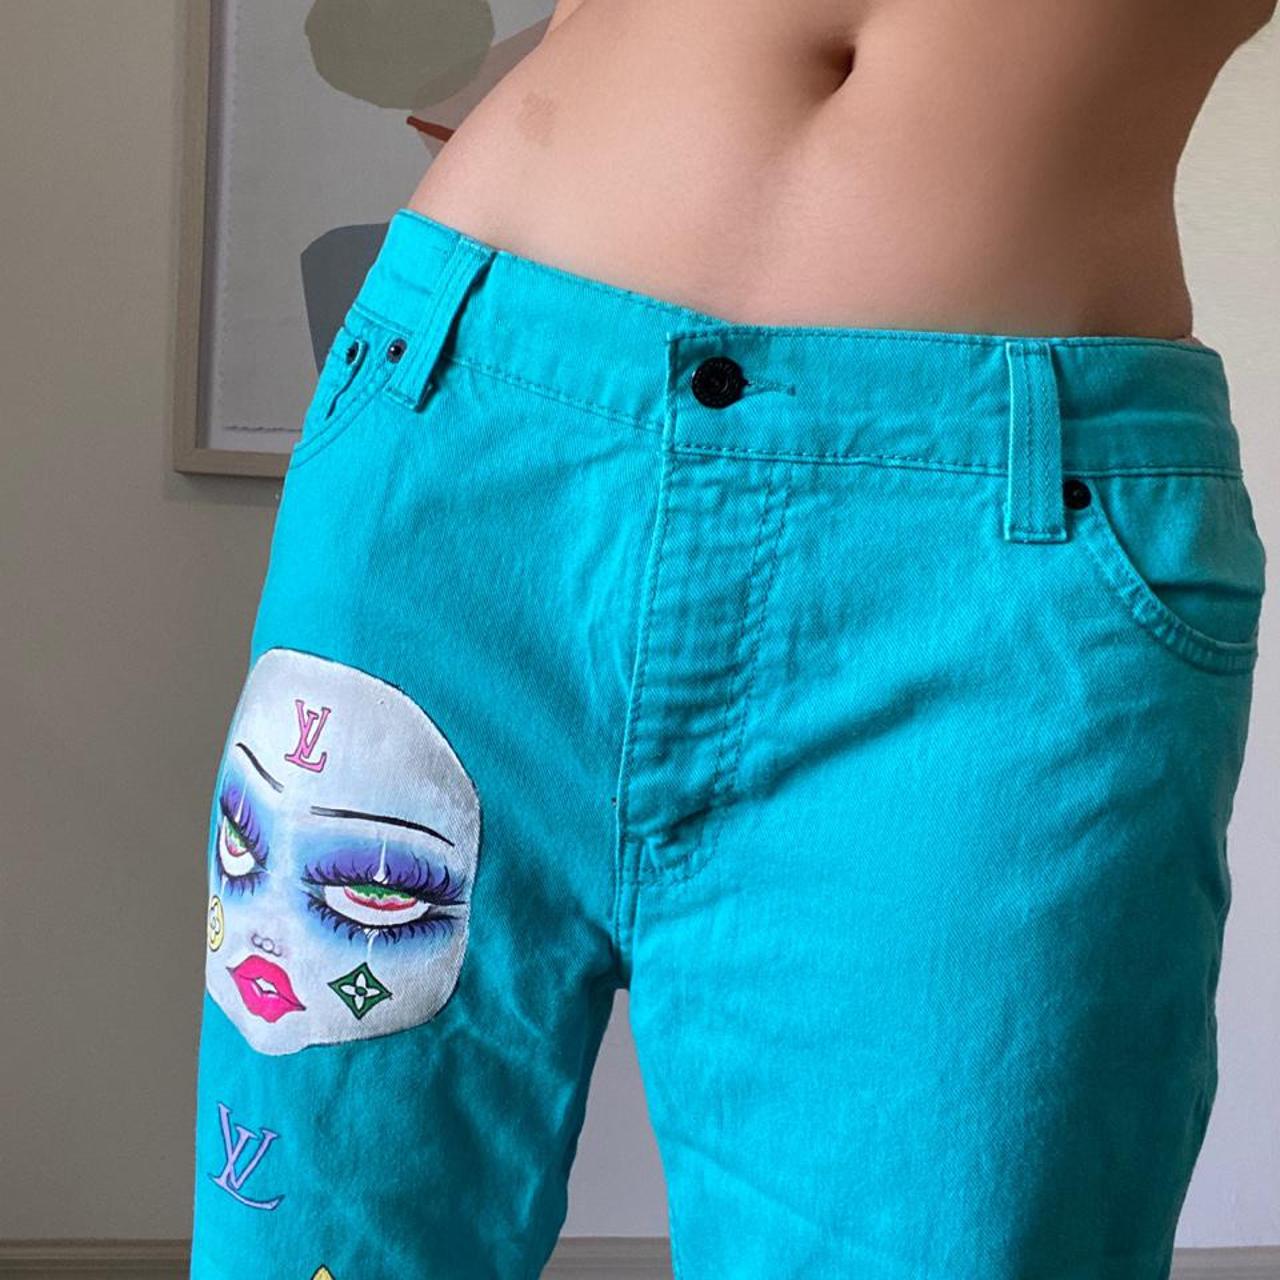 lv painted jeans｜TikTok Search